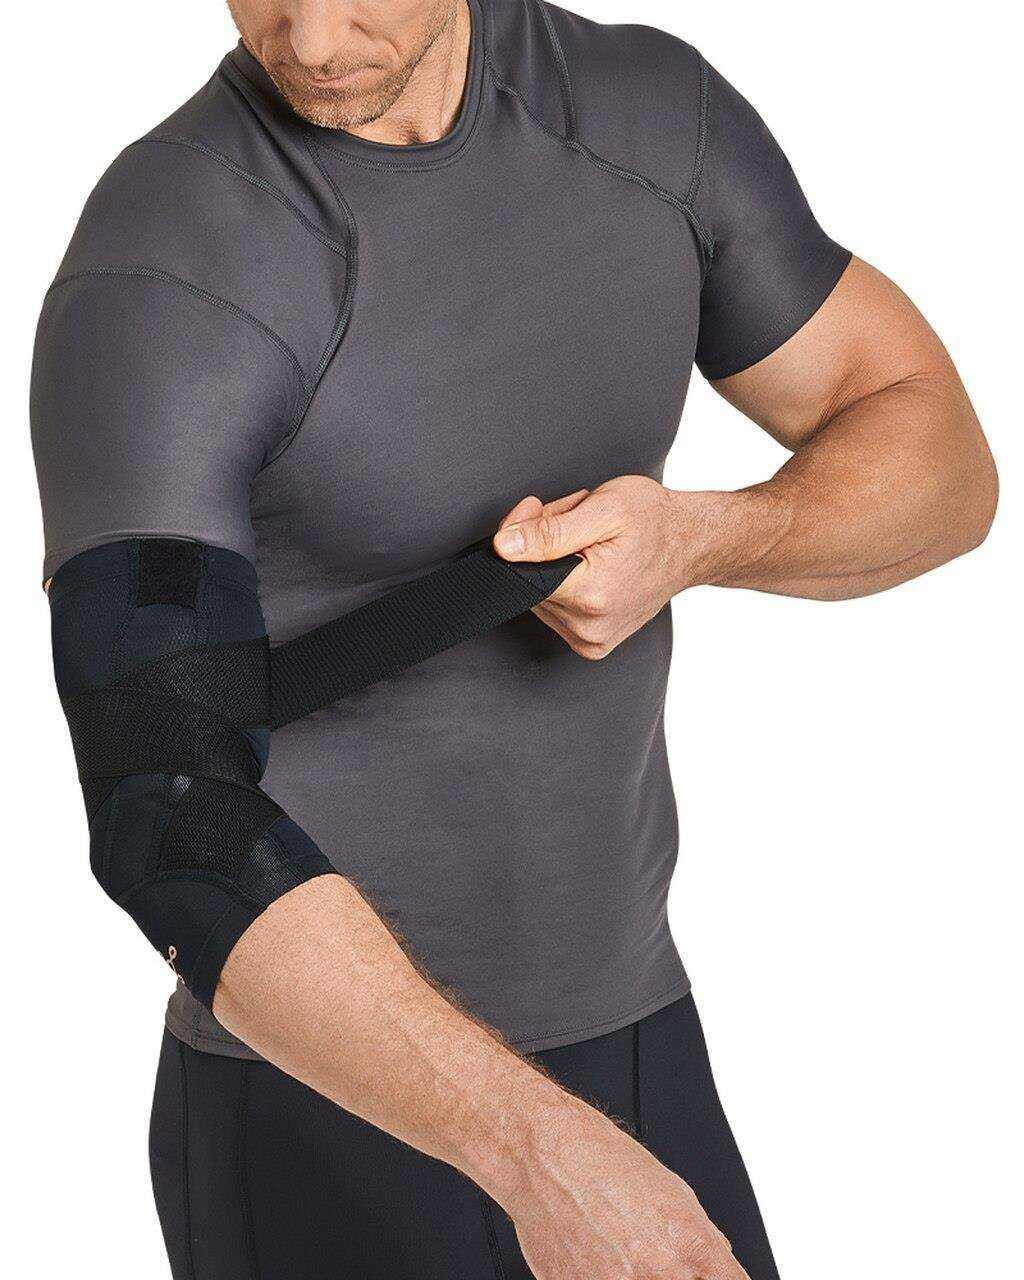 Tommie Copper Compression Elbow Sleeve